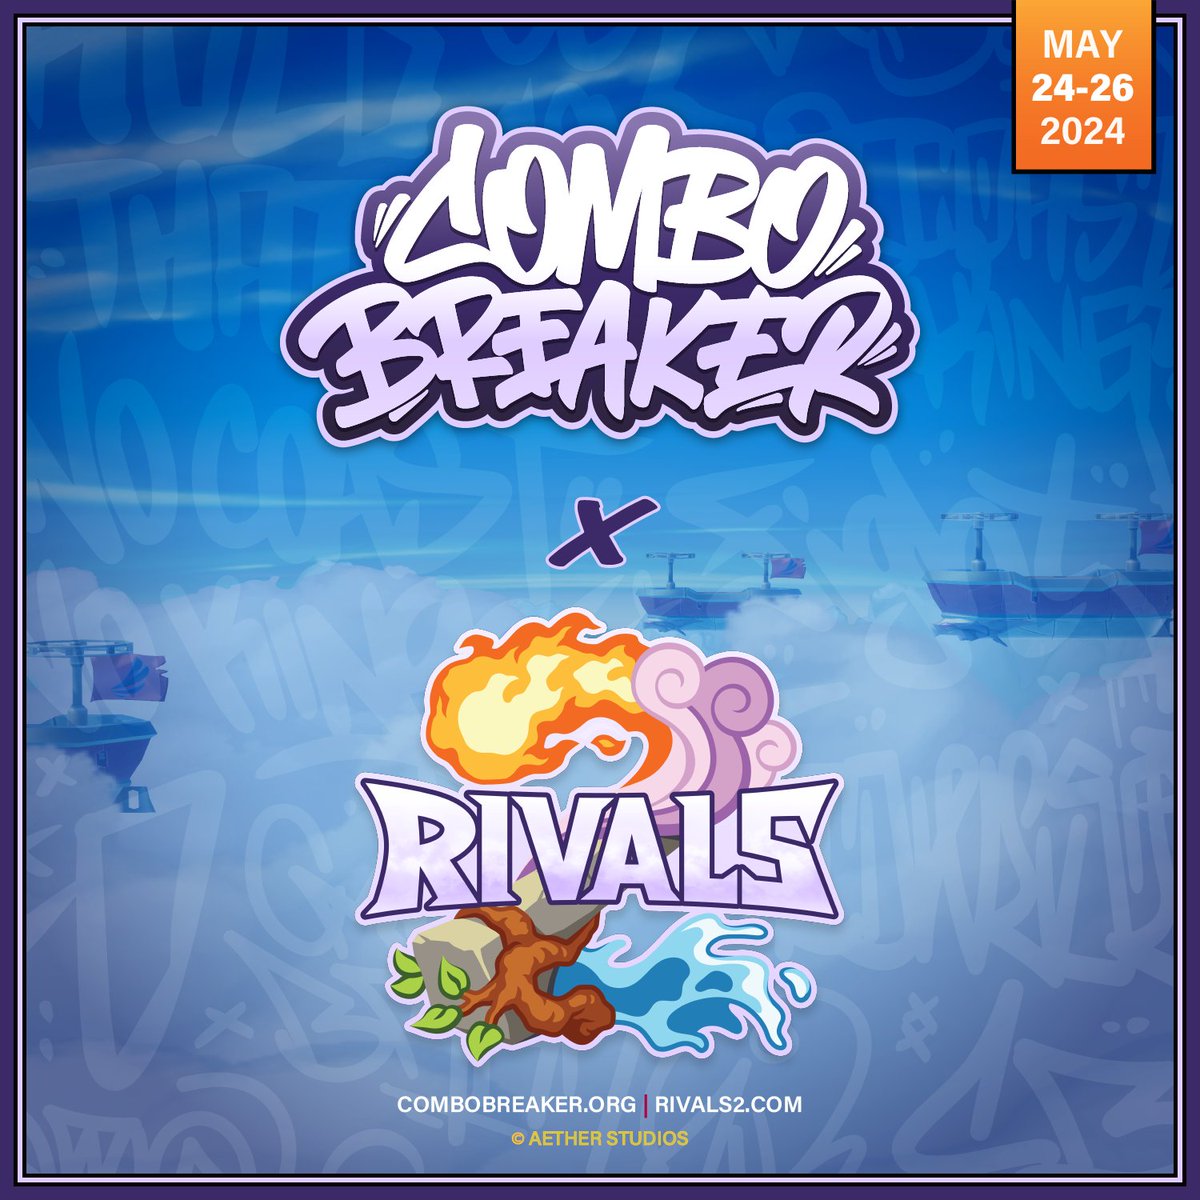 Discover @RivalsOfAether 2 at CB2024! Check out the latest Aether Studios title on-site and take part in a pre-release tournament as part of the ALL IN TOGETHER: Community Tourneys. Find out more at combobreaker.org/rivals2!